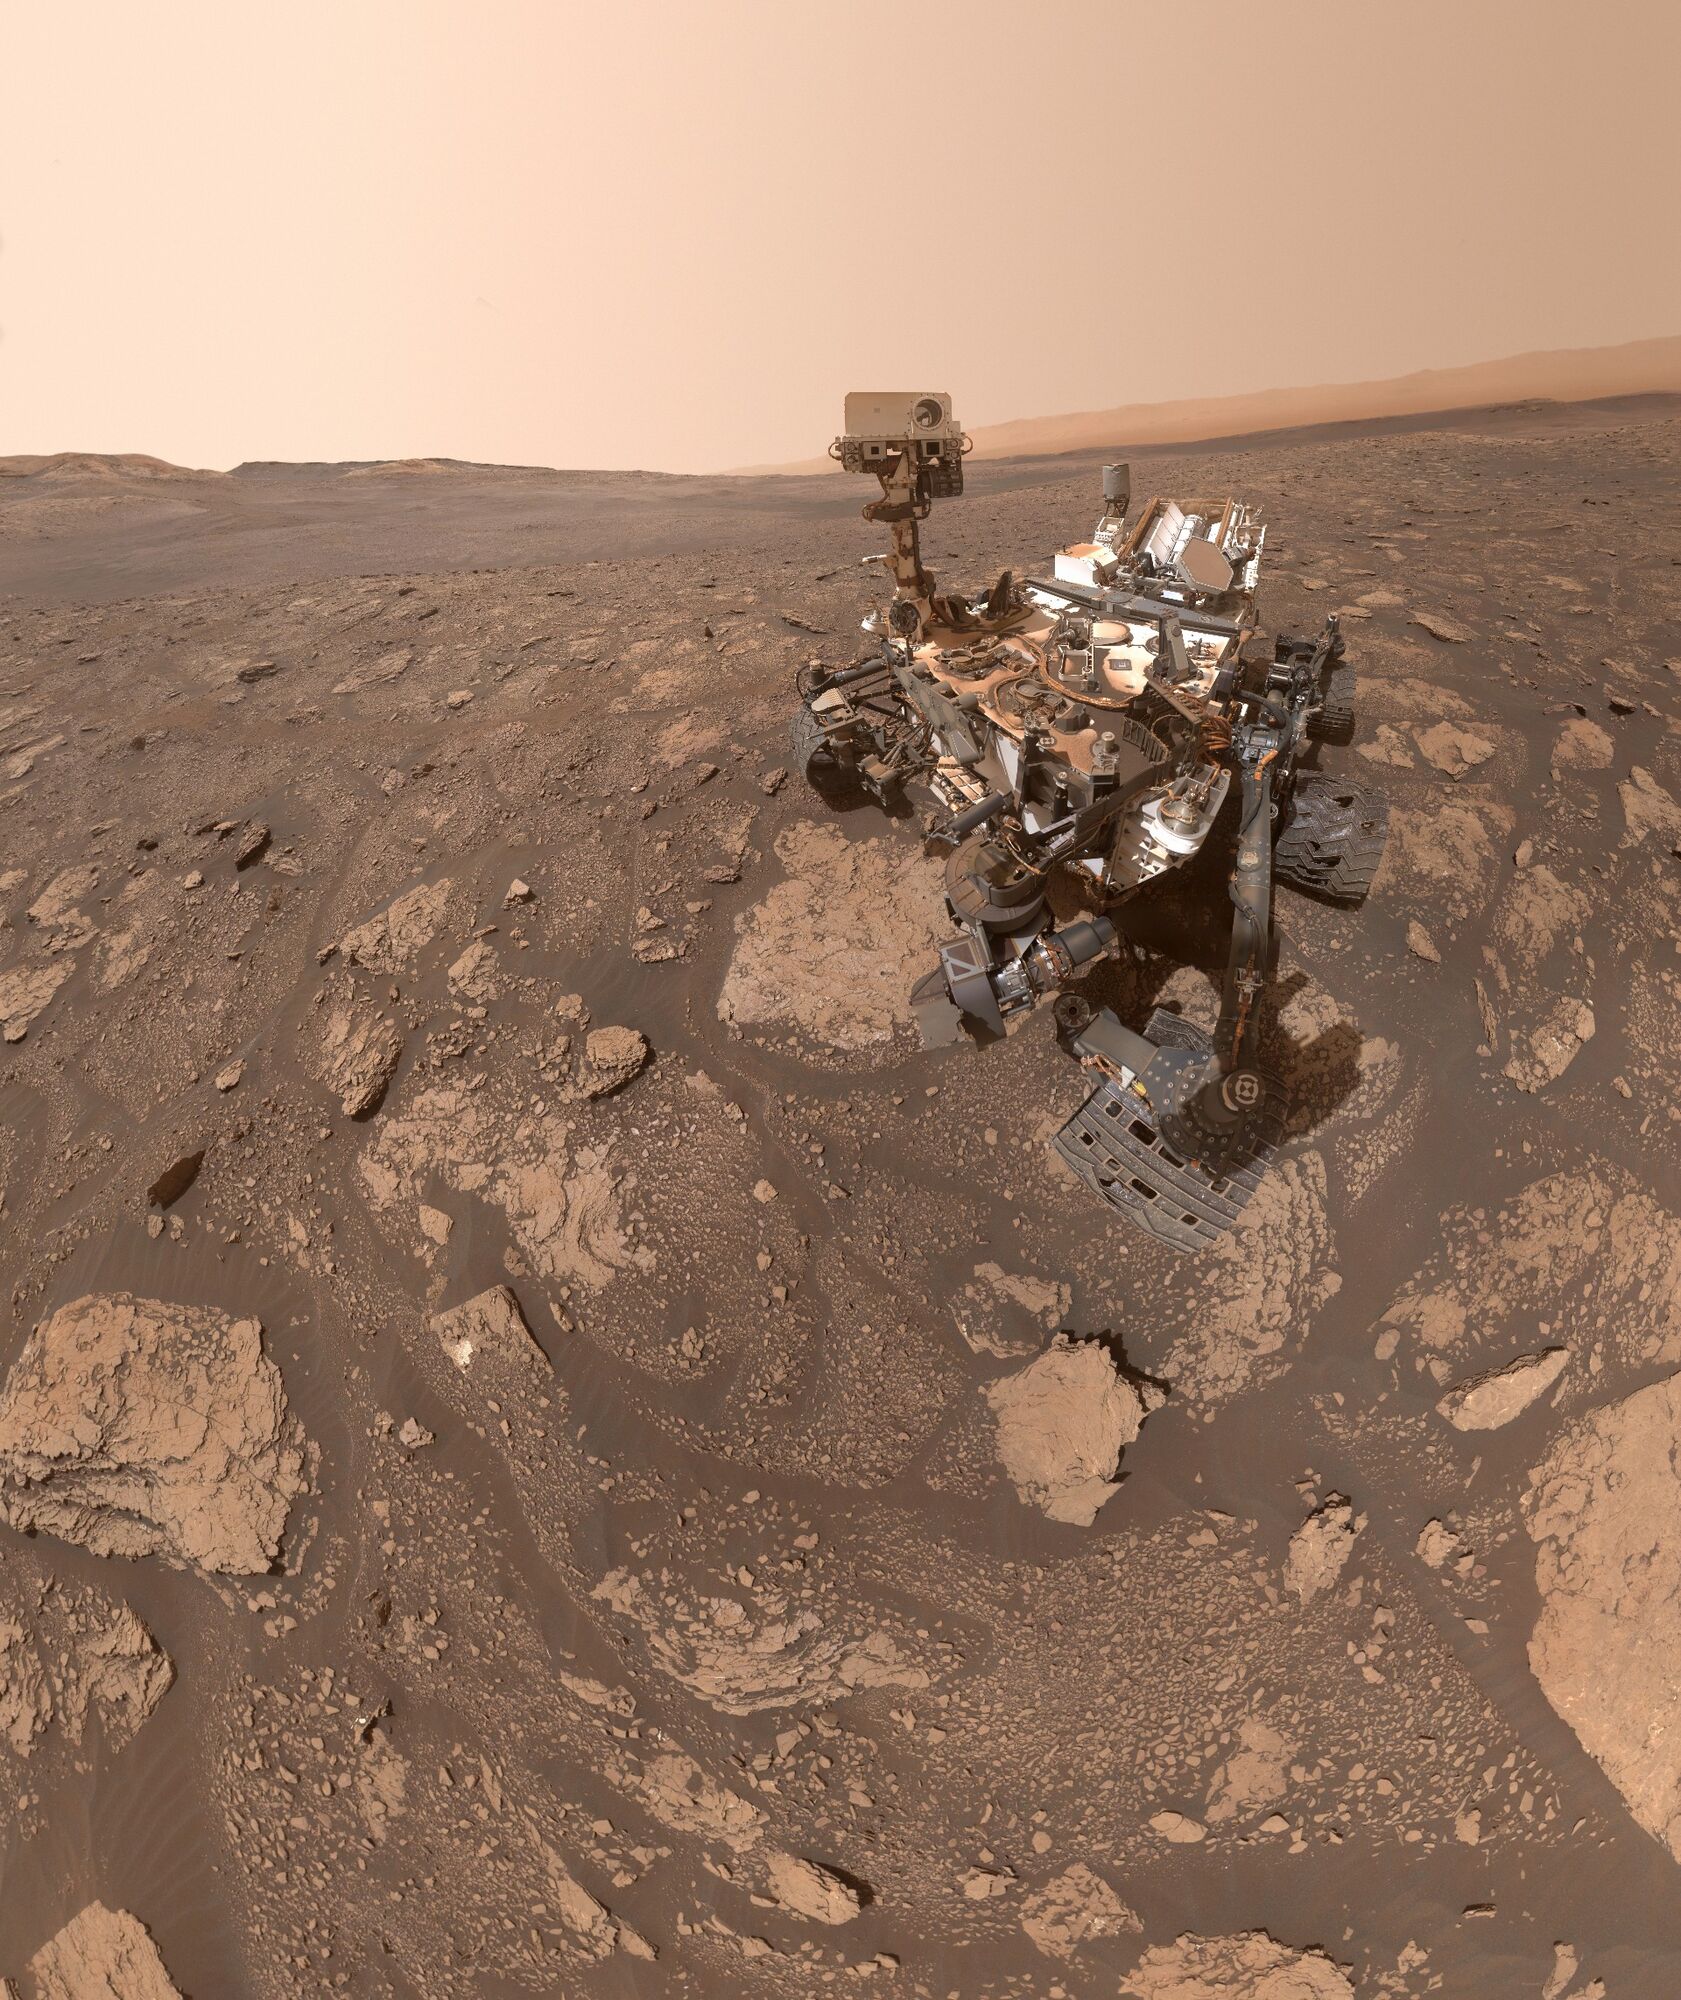 Curiosity rover taking picture of itself on Mars surface